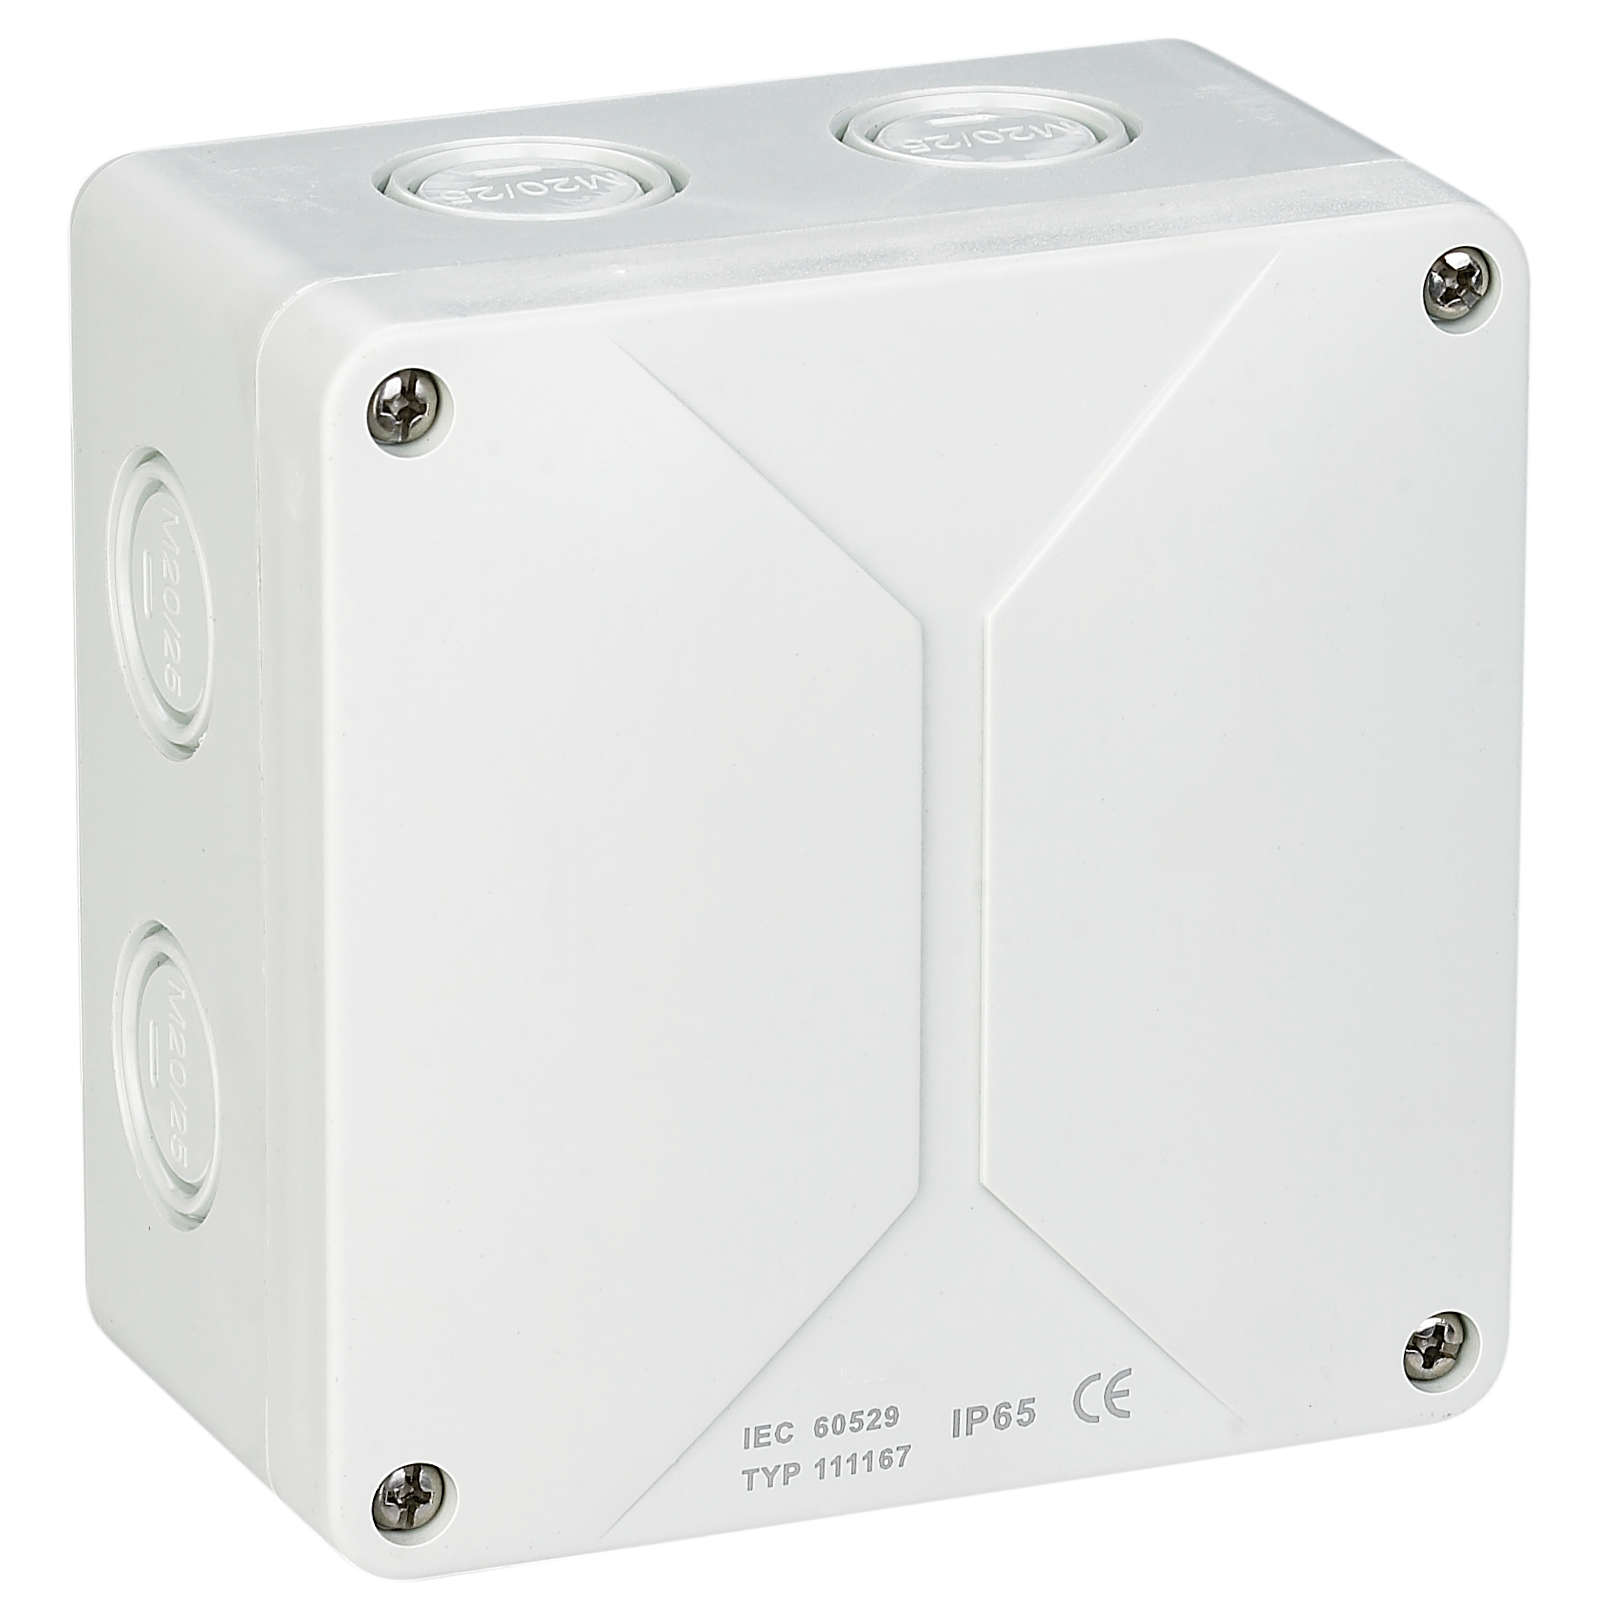 Junction Box: Terminal, Electrical, Wiring, Connection, Distribution, Enclosure, Cable, Power, Control